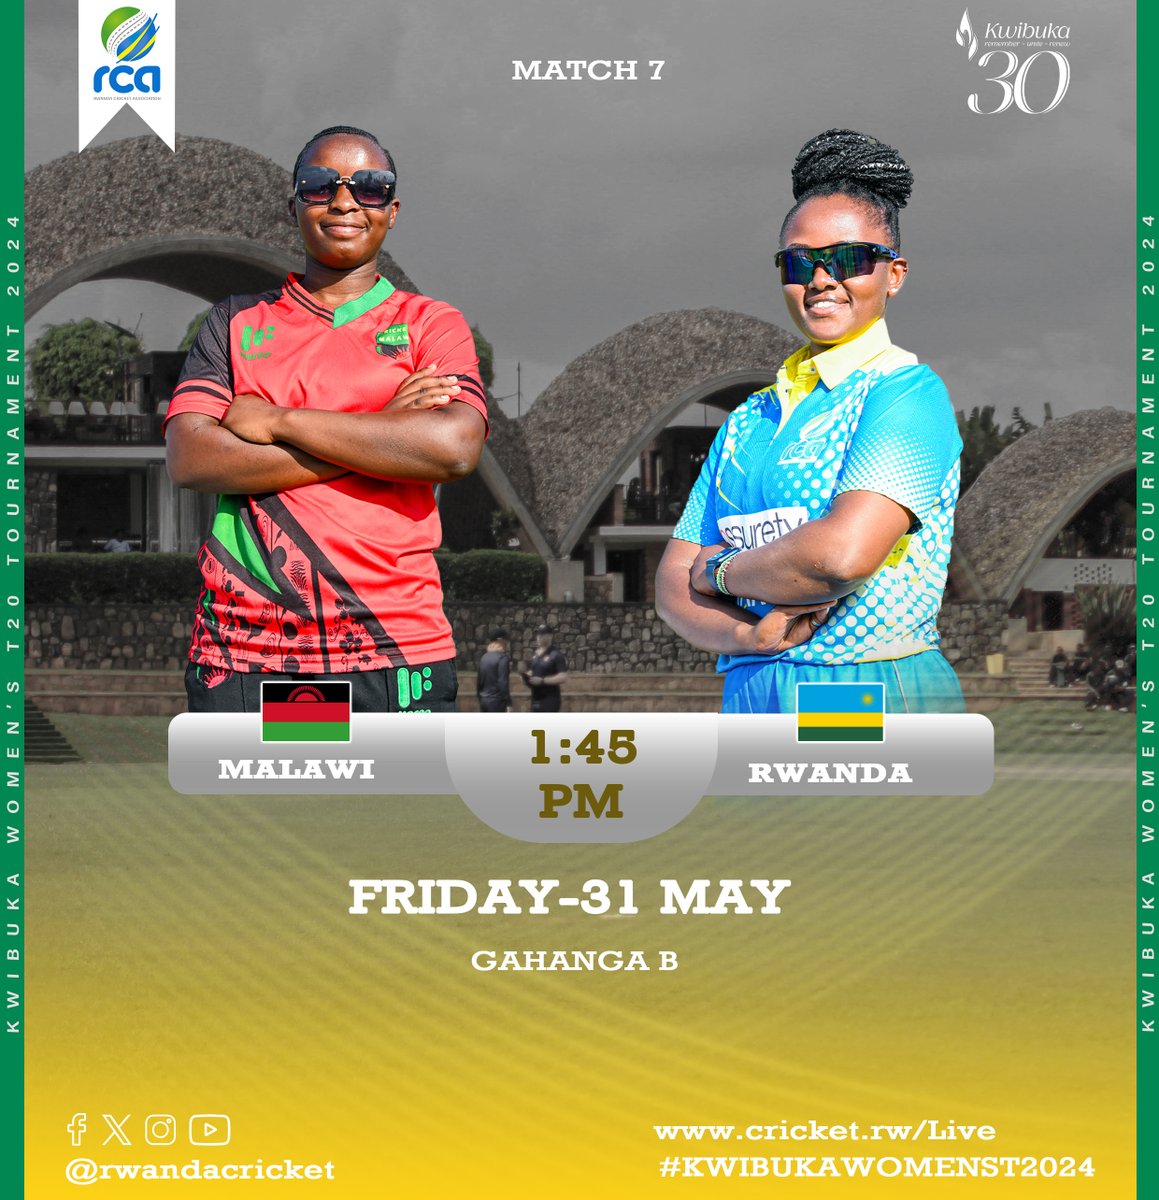 🏏 Kwibuka Cricket 2024 - Game 7🏏

🇲🇼 Malawi Women vs. 🇷🇼 Rwanda Women
Tomorrow
Will Rwanda secure another victory, or will Malawi show their strength? Let's find out in this thrilling afternoon encounter!
#KwibukaCricket2024 #MalawiVsRwanda #CricketForAll #LiveCricket #Game